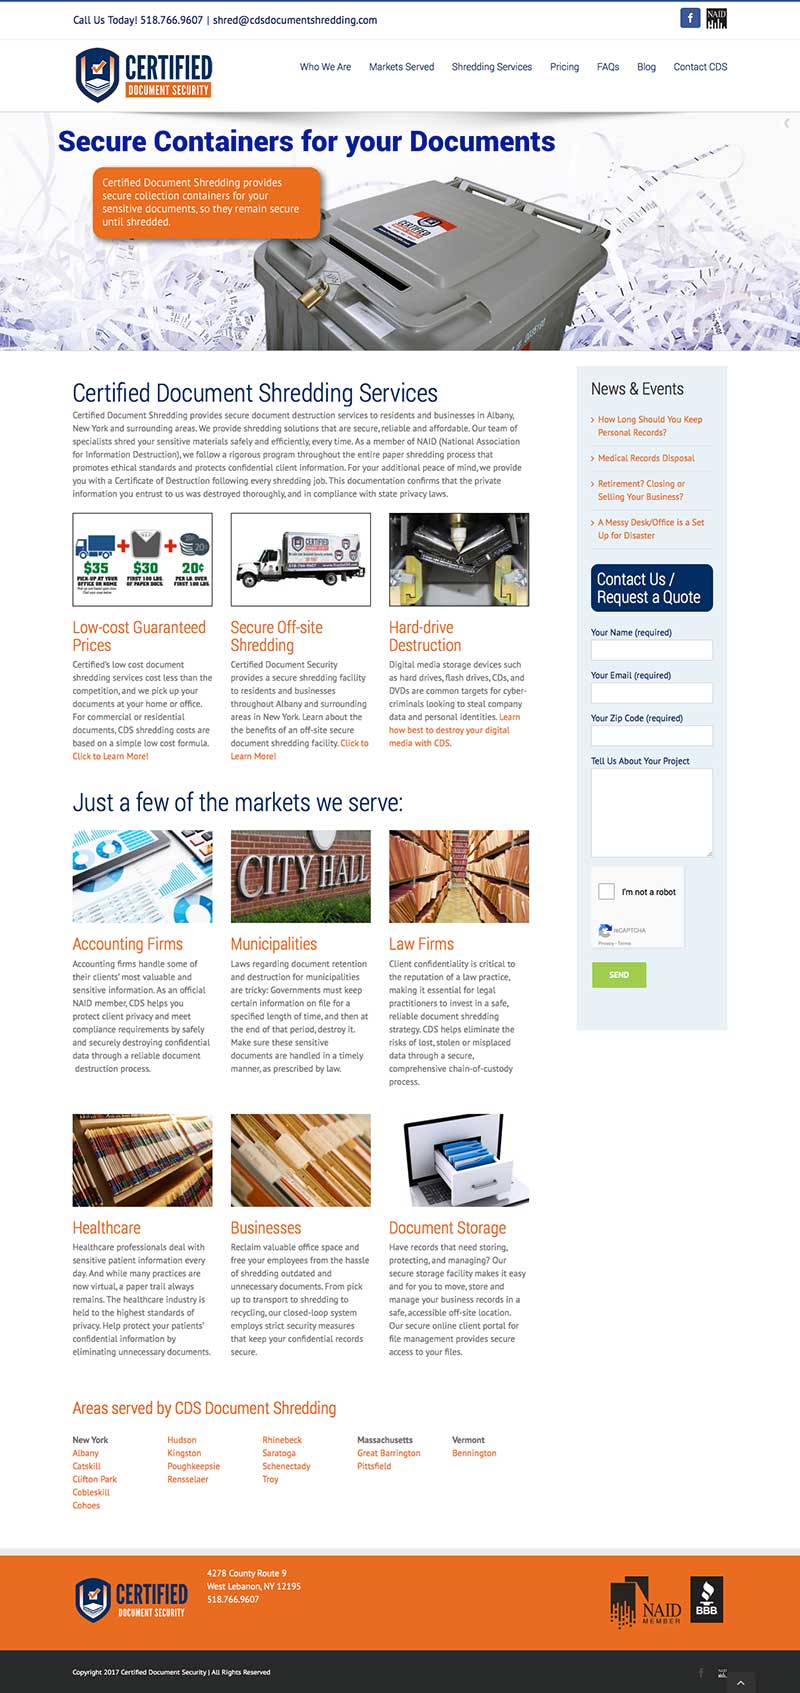 Homepage of Certified Document Shredding website, designed and hosted by Blass Web Services